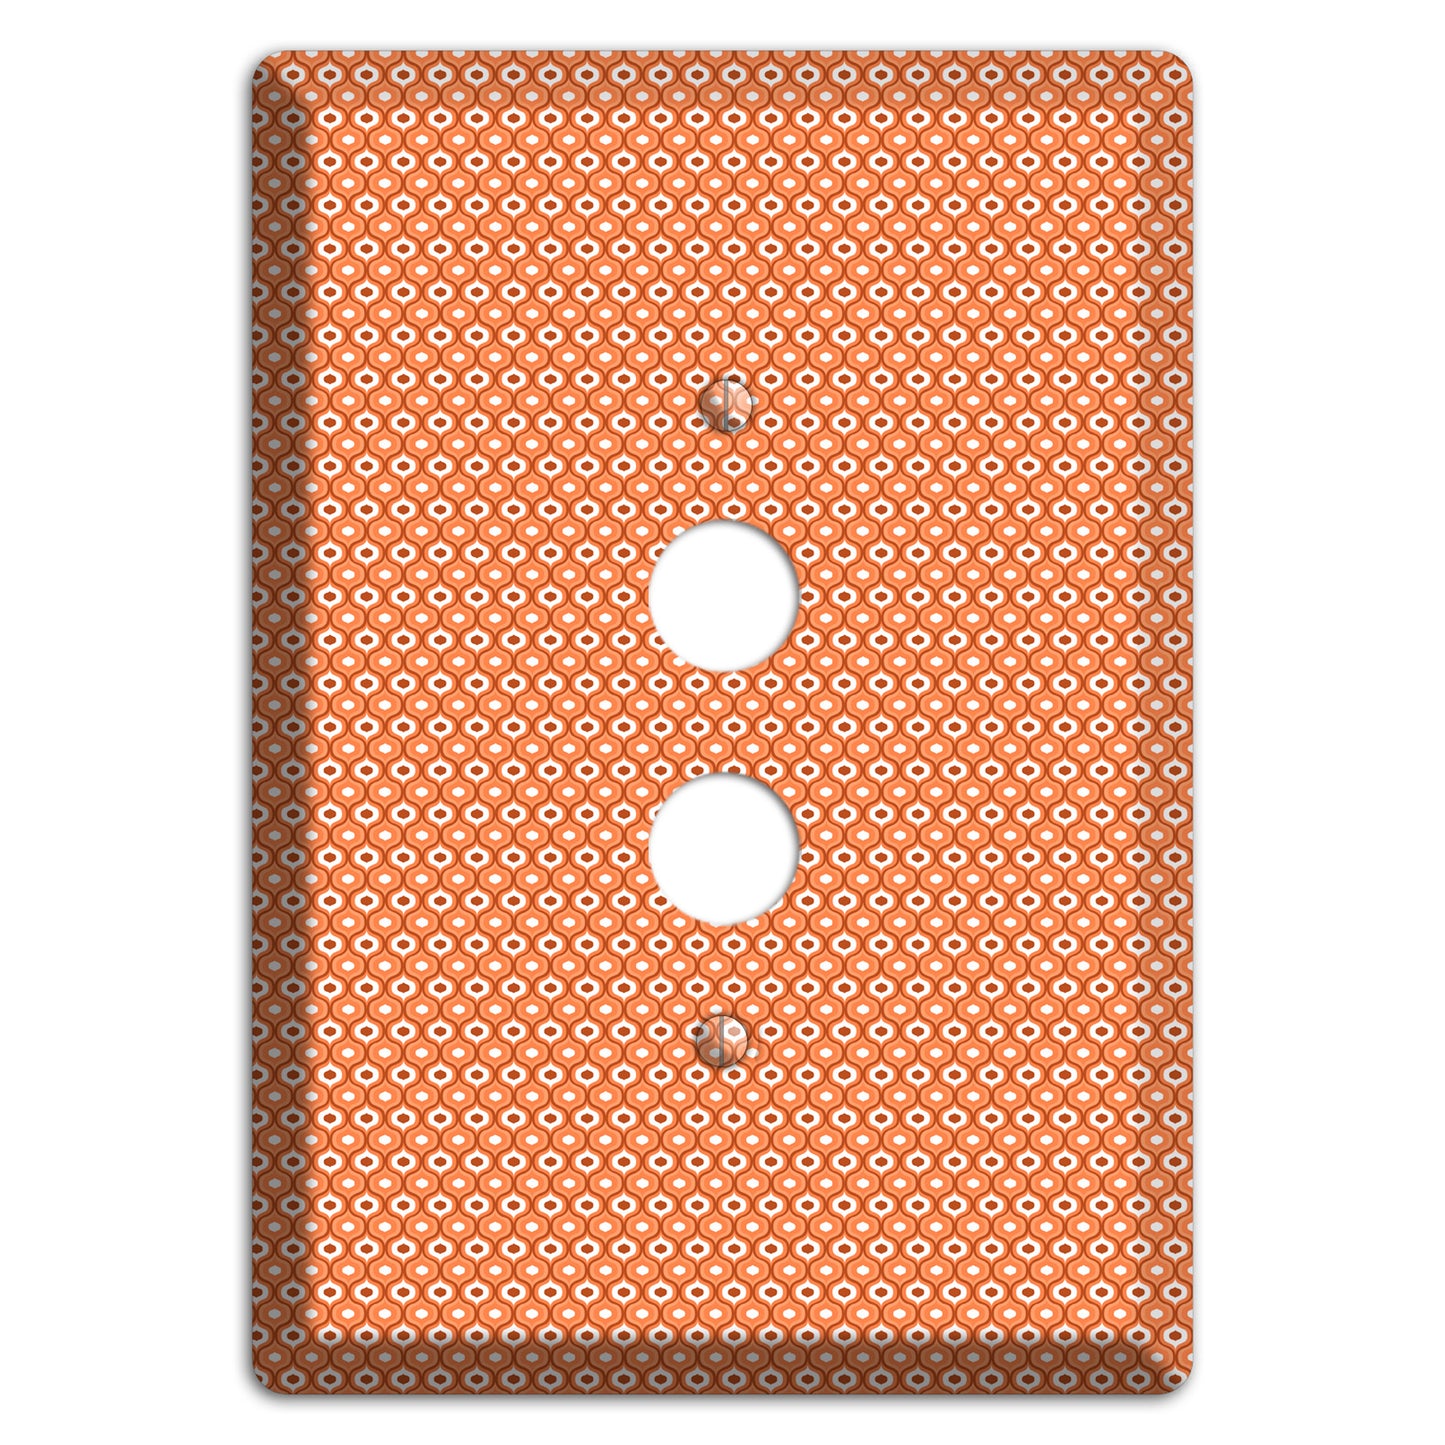 Coral Tiny Double Scallop 1 Pushbutton Wallplate